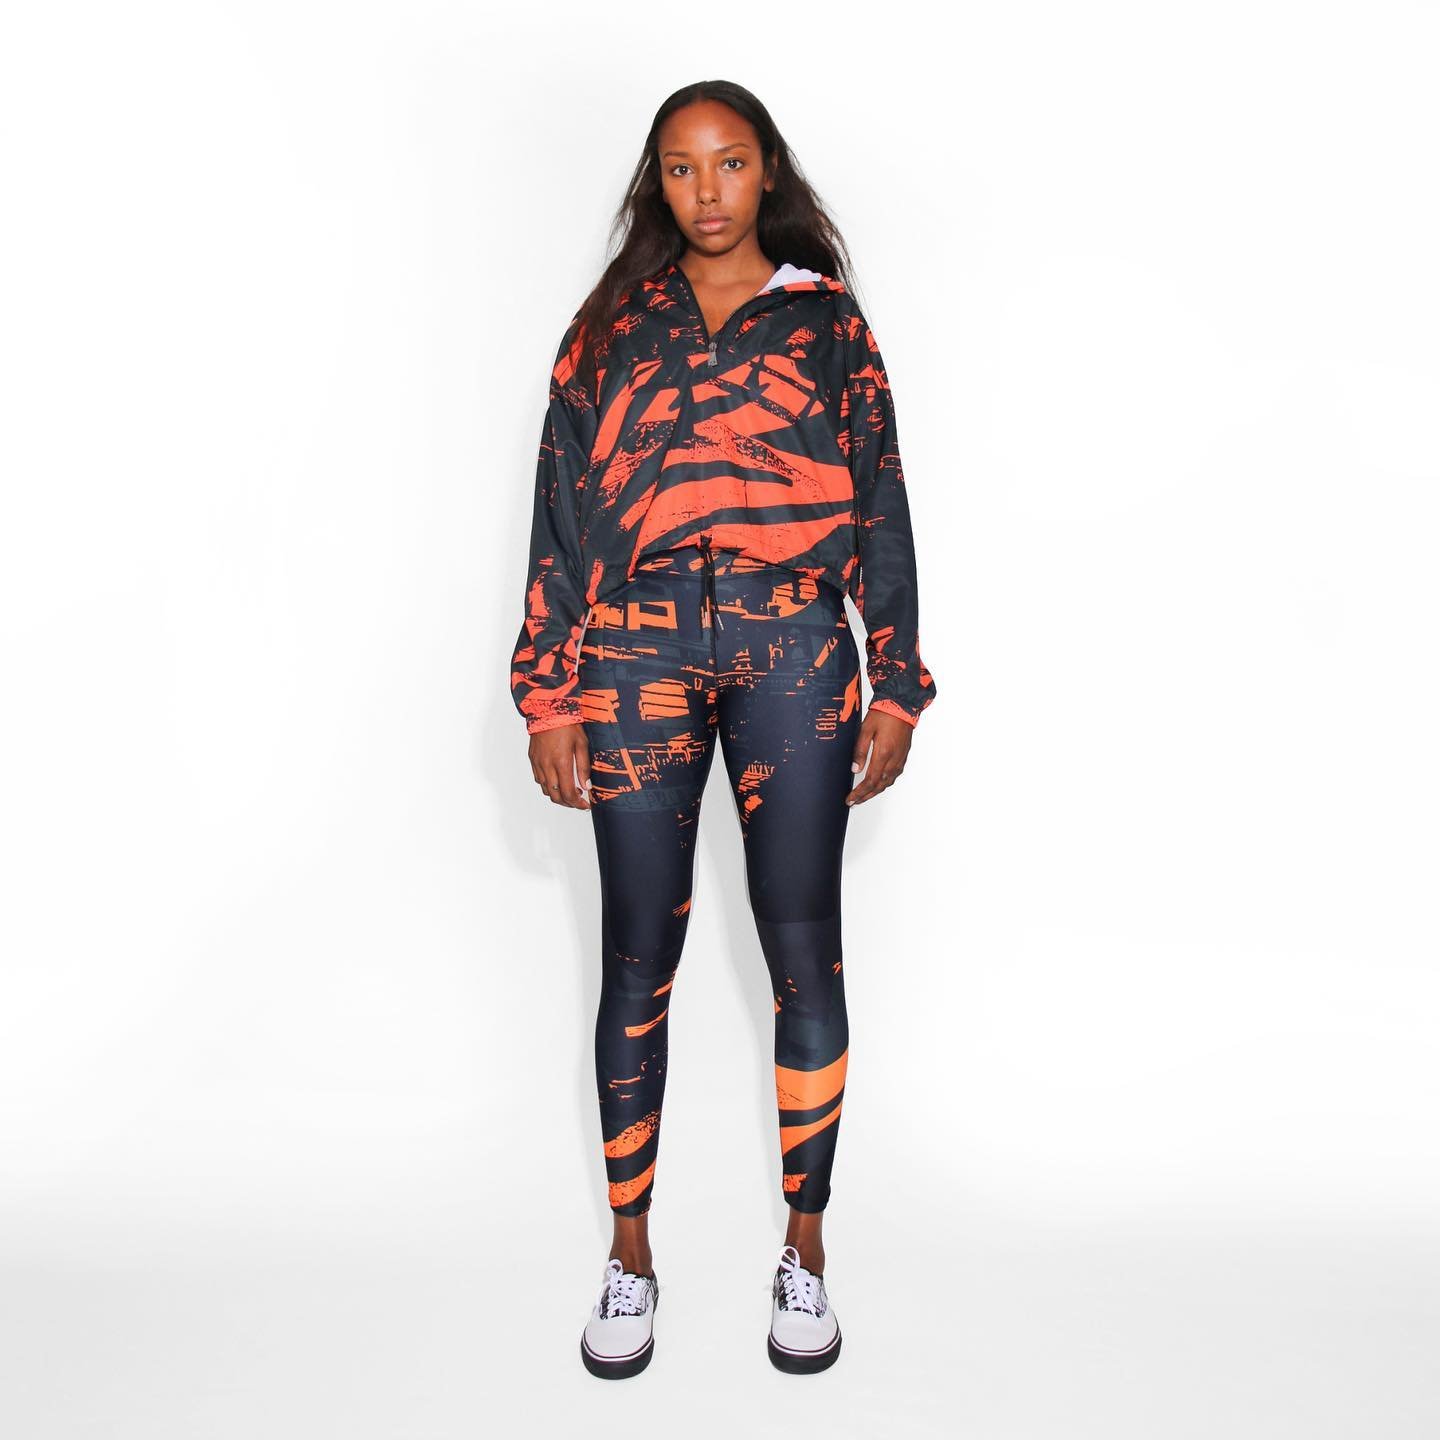 N&deg;11, Urban collection: A three-piece composition: jacket, top and leggings, featuring a version of our signature print, with orange (also available with green). Mix and match with different items and colors, or wear them all together, for a beau